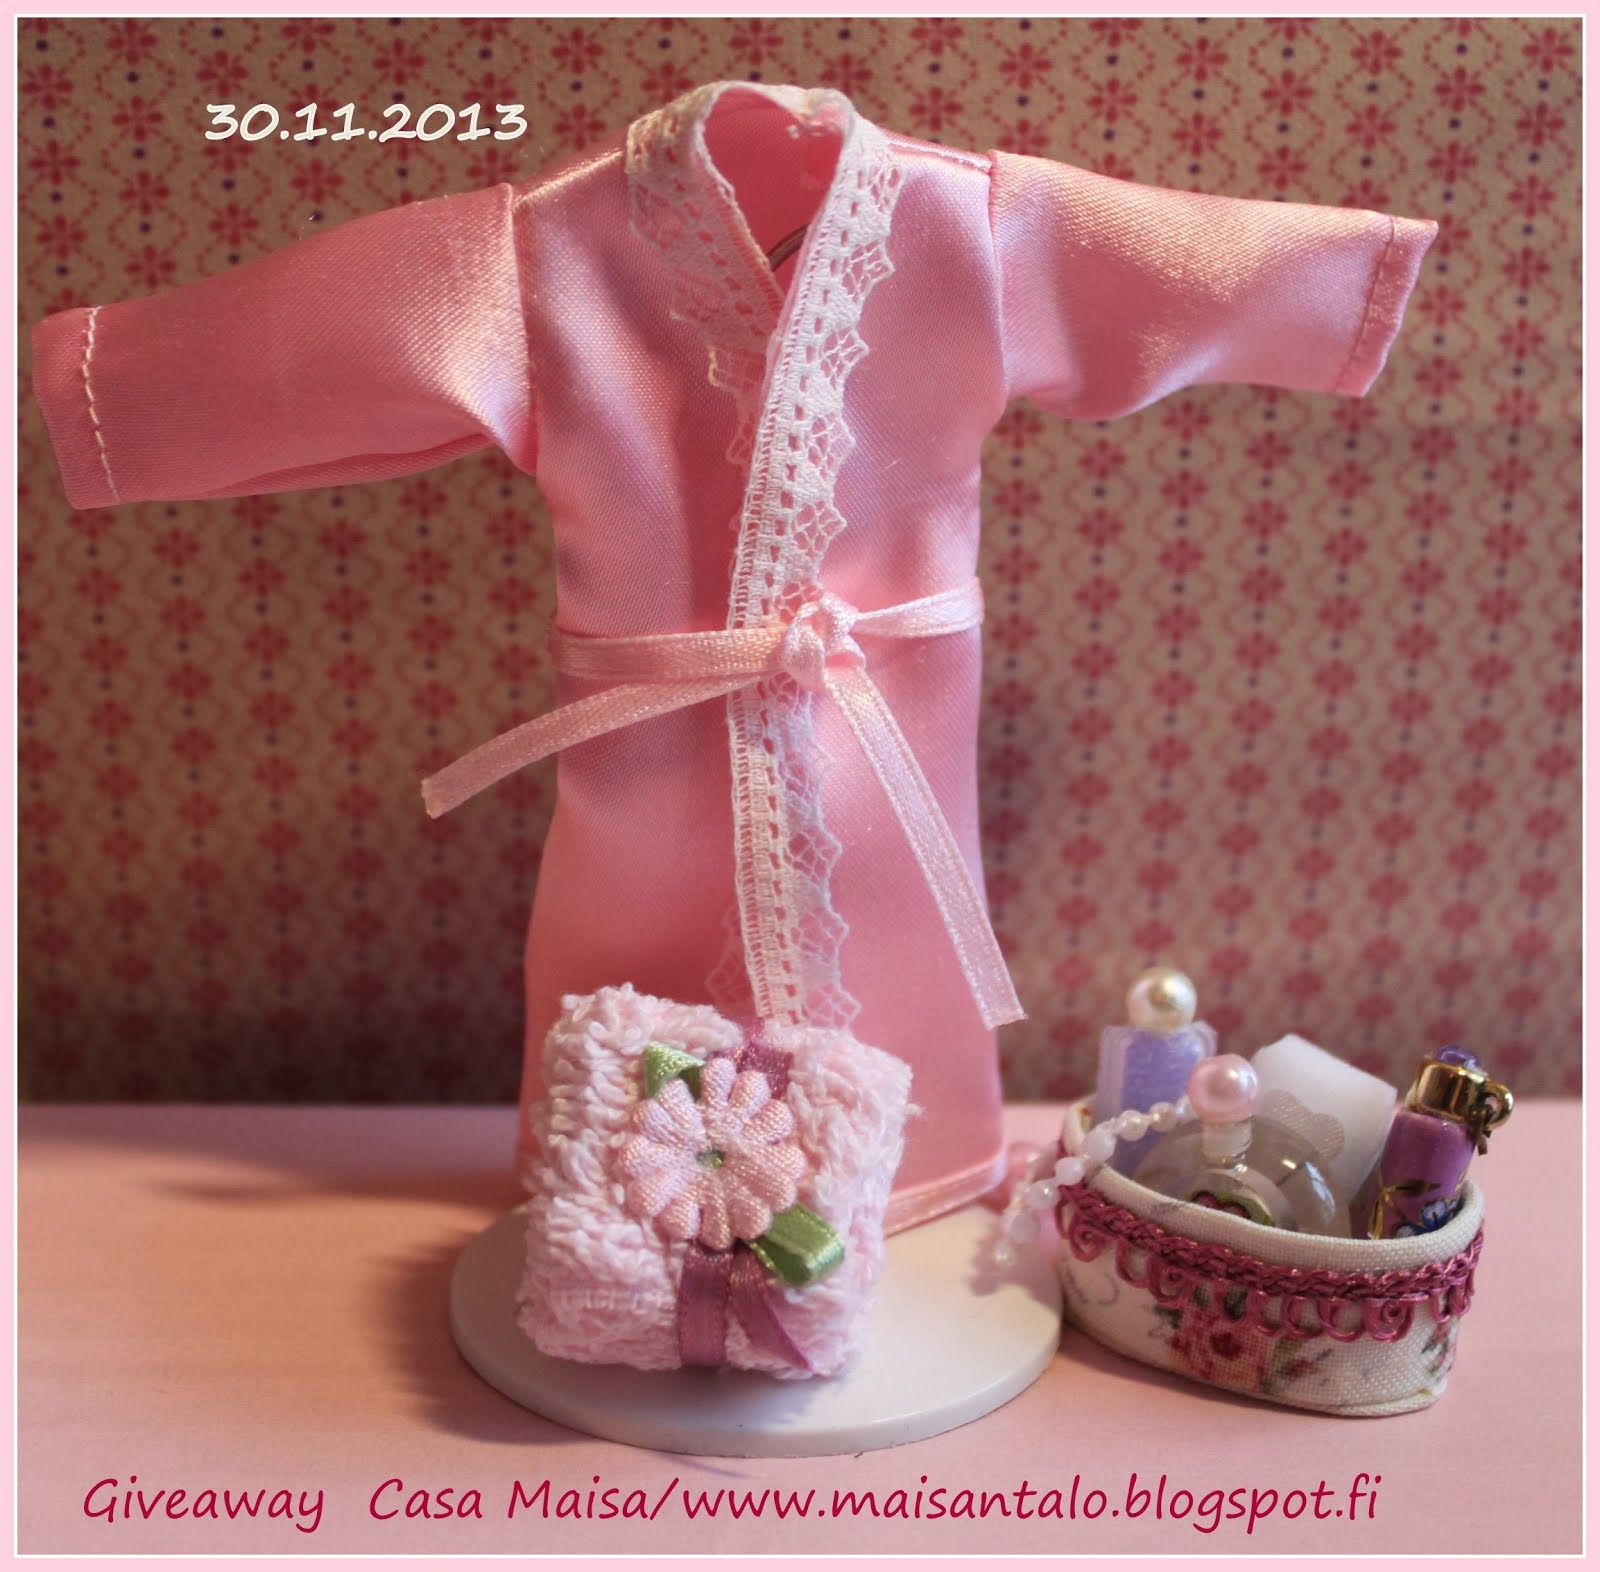 My Giveaway 30.11.2013